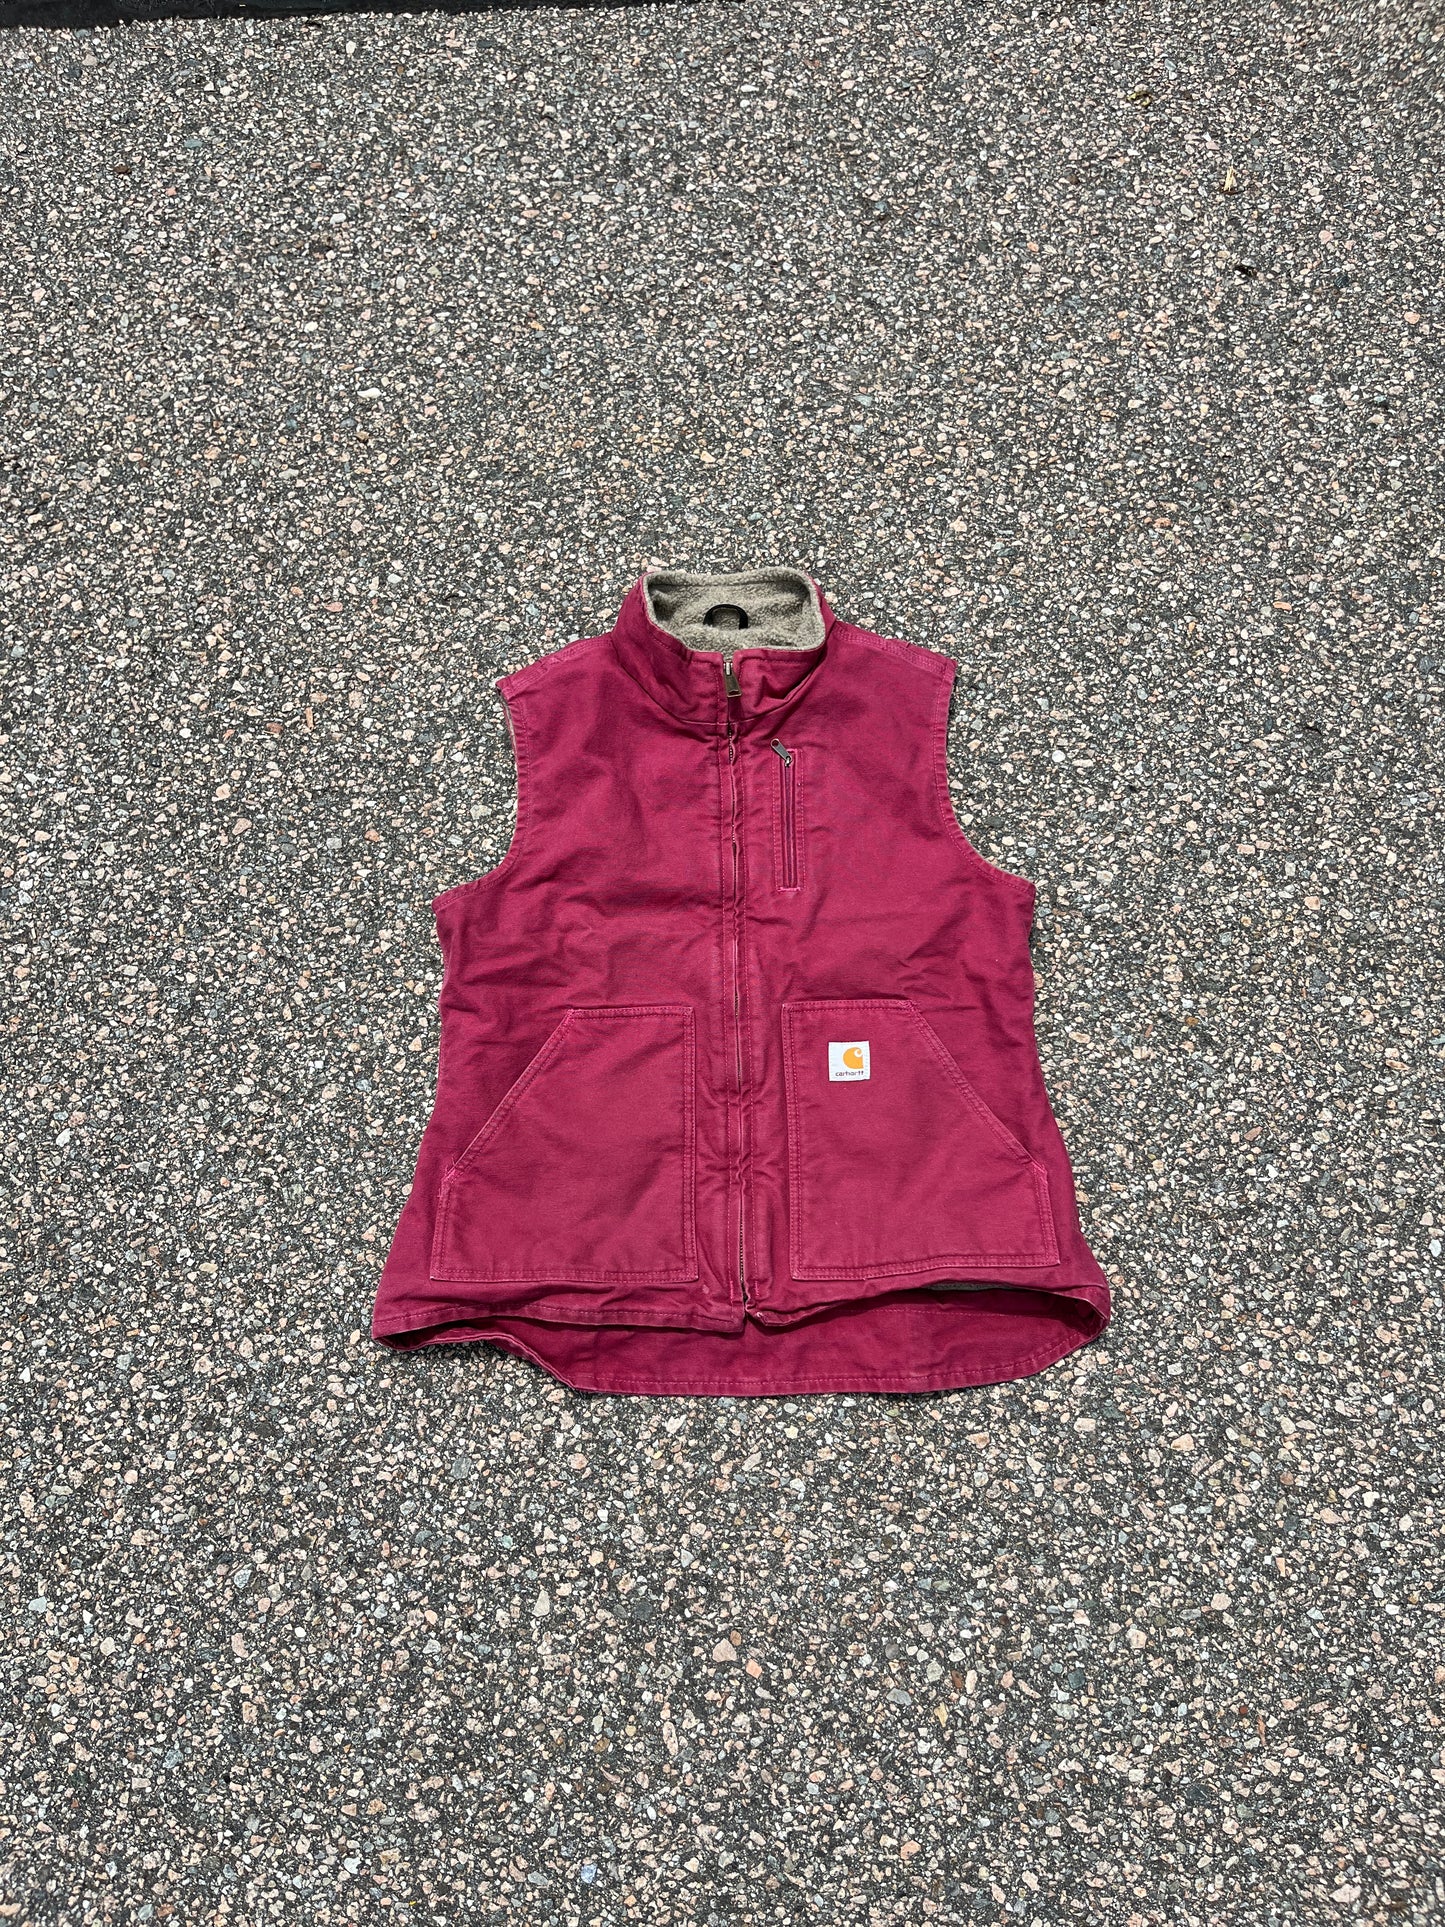 Pink Carhartt Sherpa Lined Vest - Fits S-M